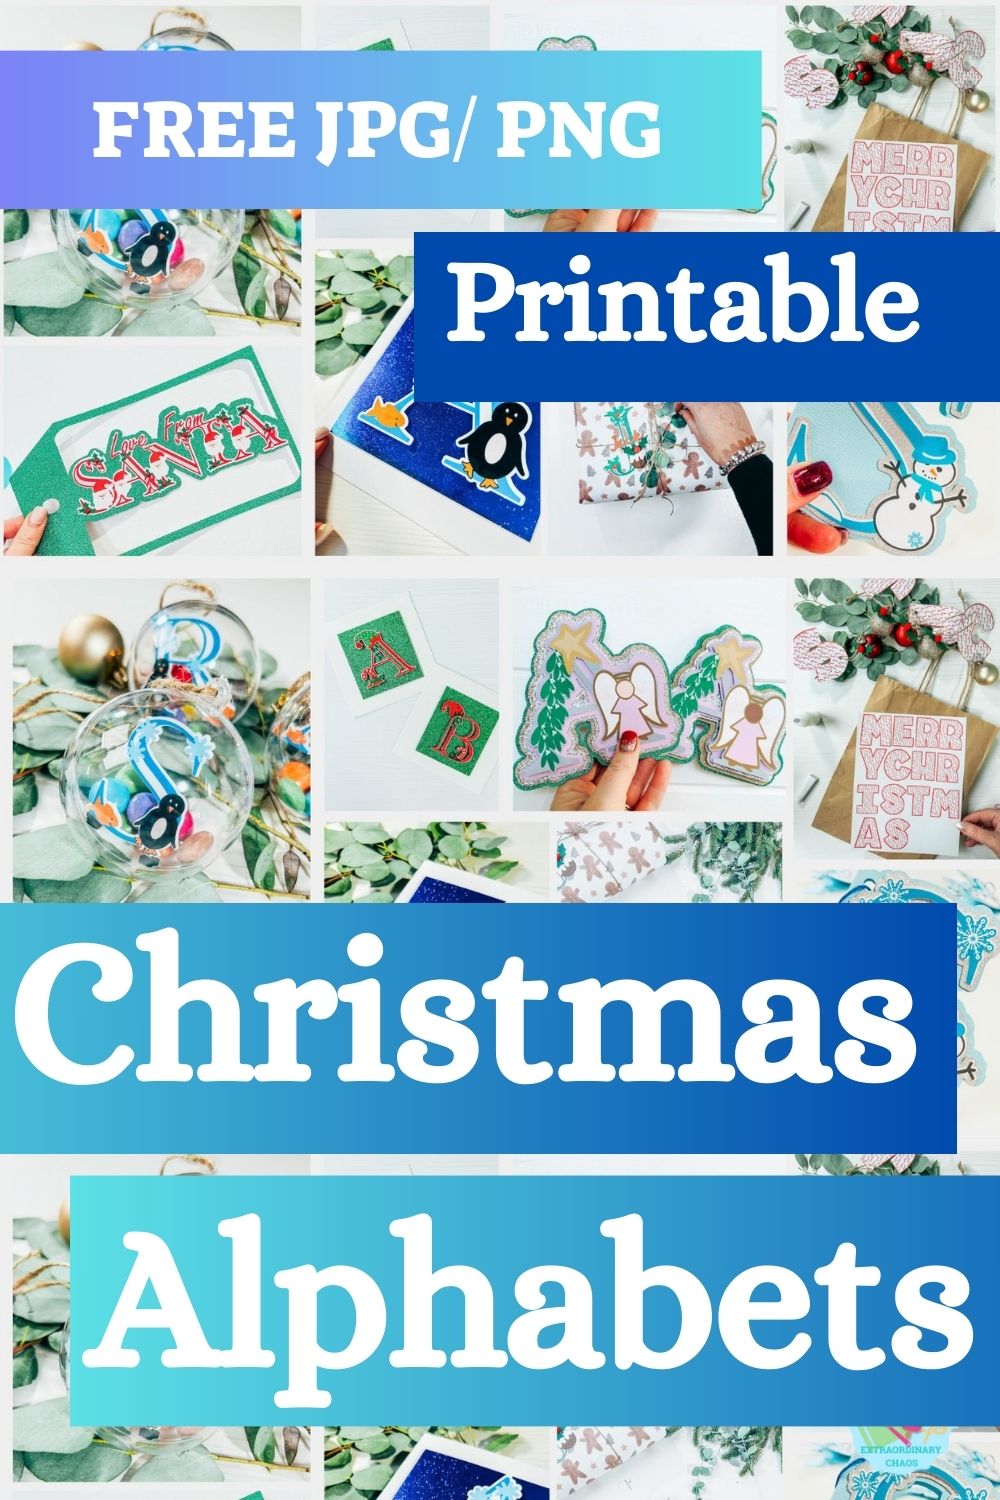 Copy of Free downloadable Printable JPG PNG Christmas Alphabets